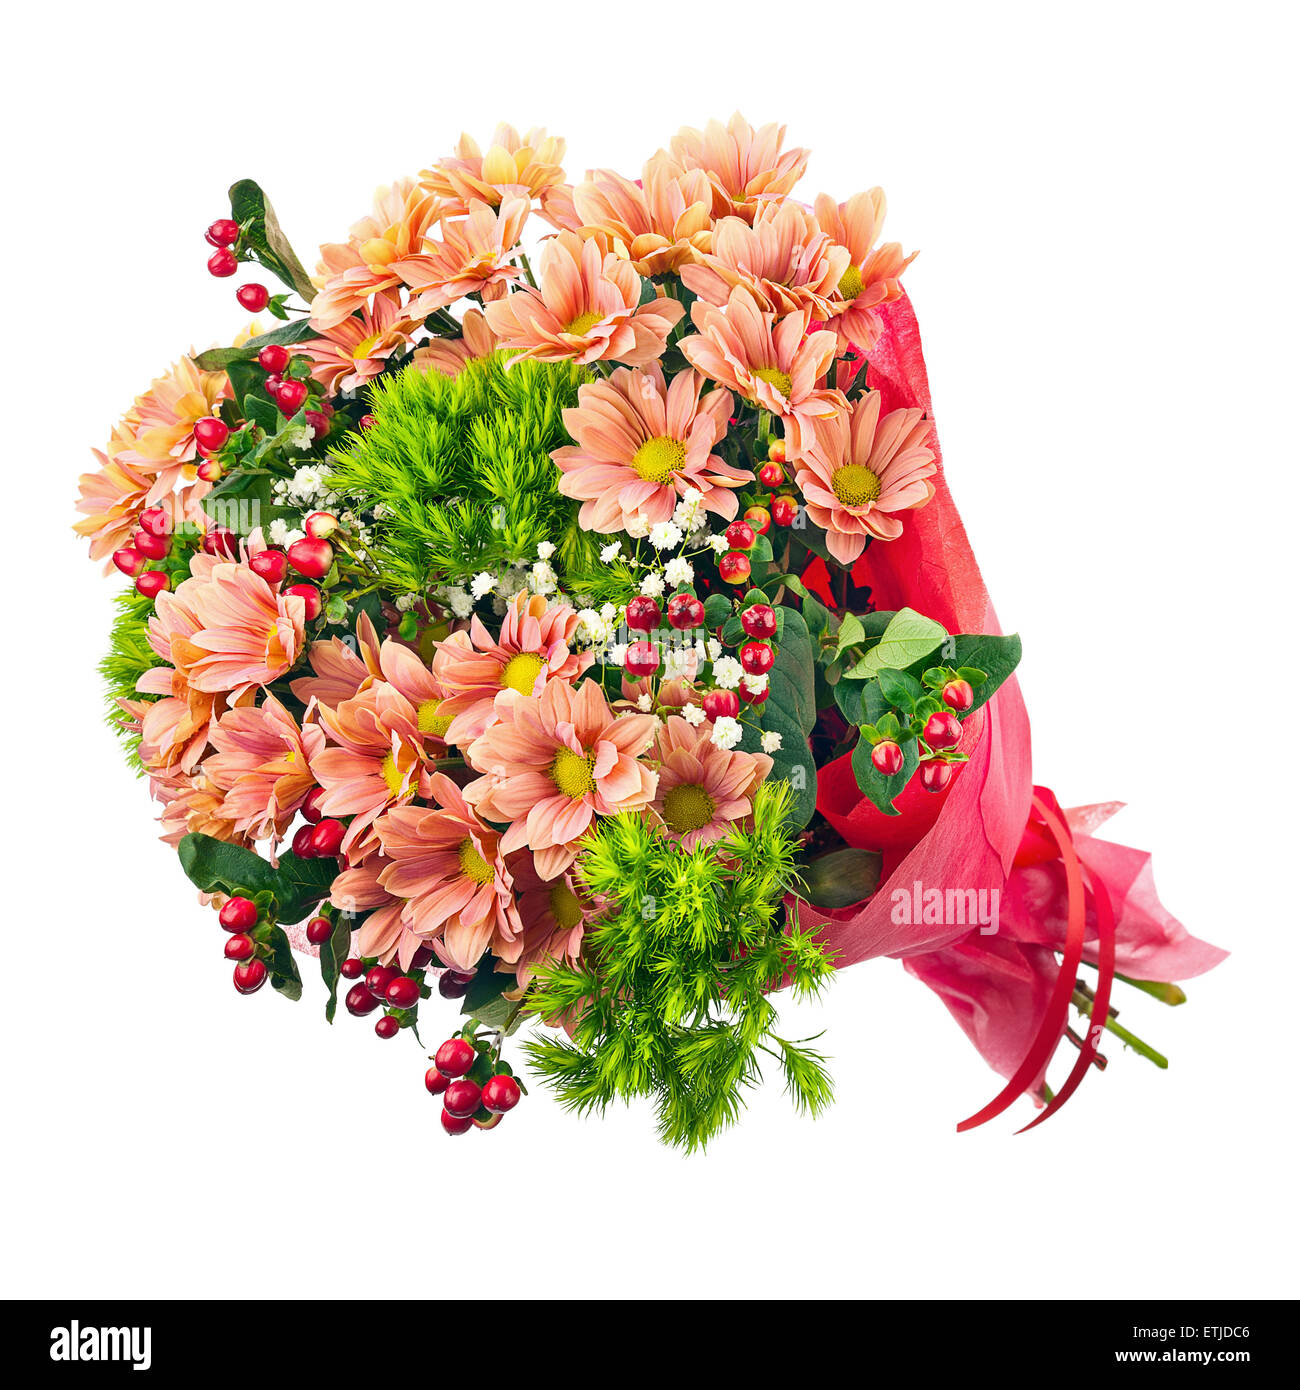 Bouquet of gerbera, carnations and other flowers isolated on white background. Stock Photo